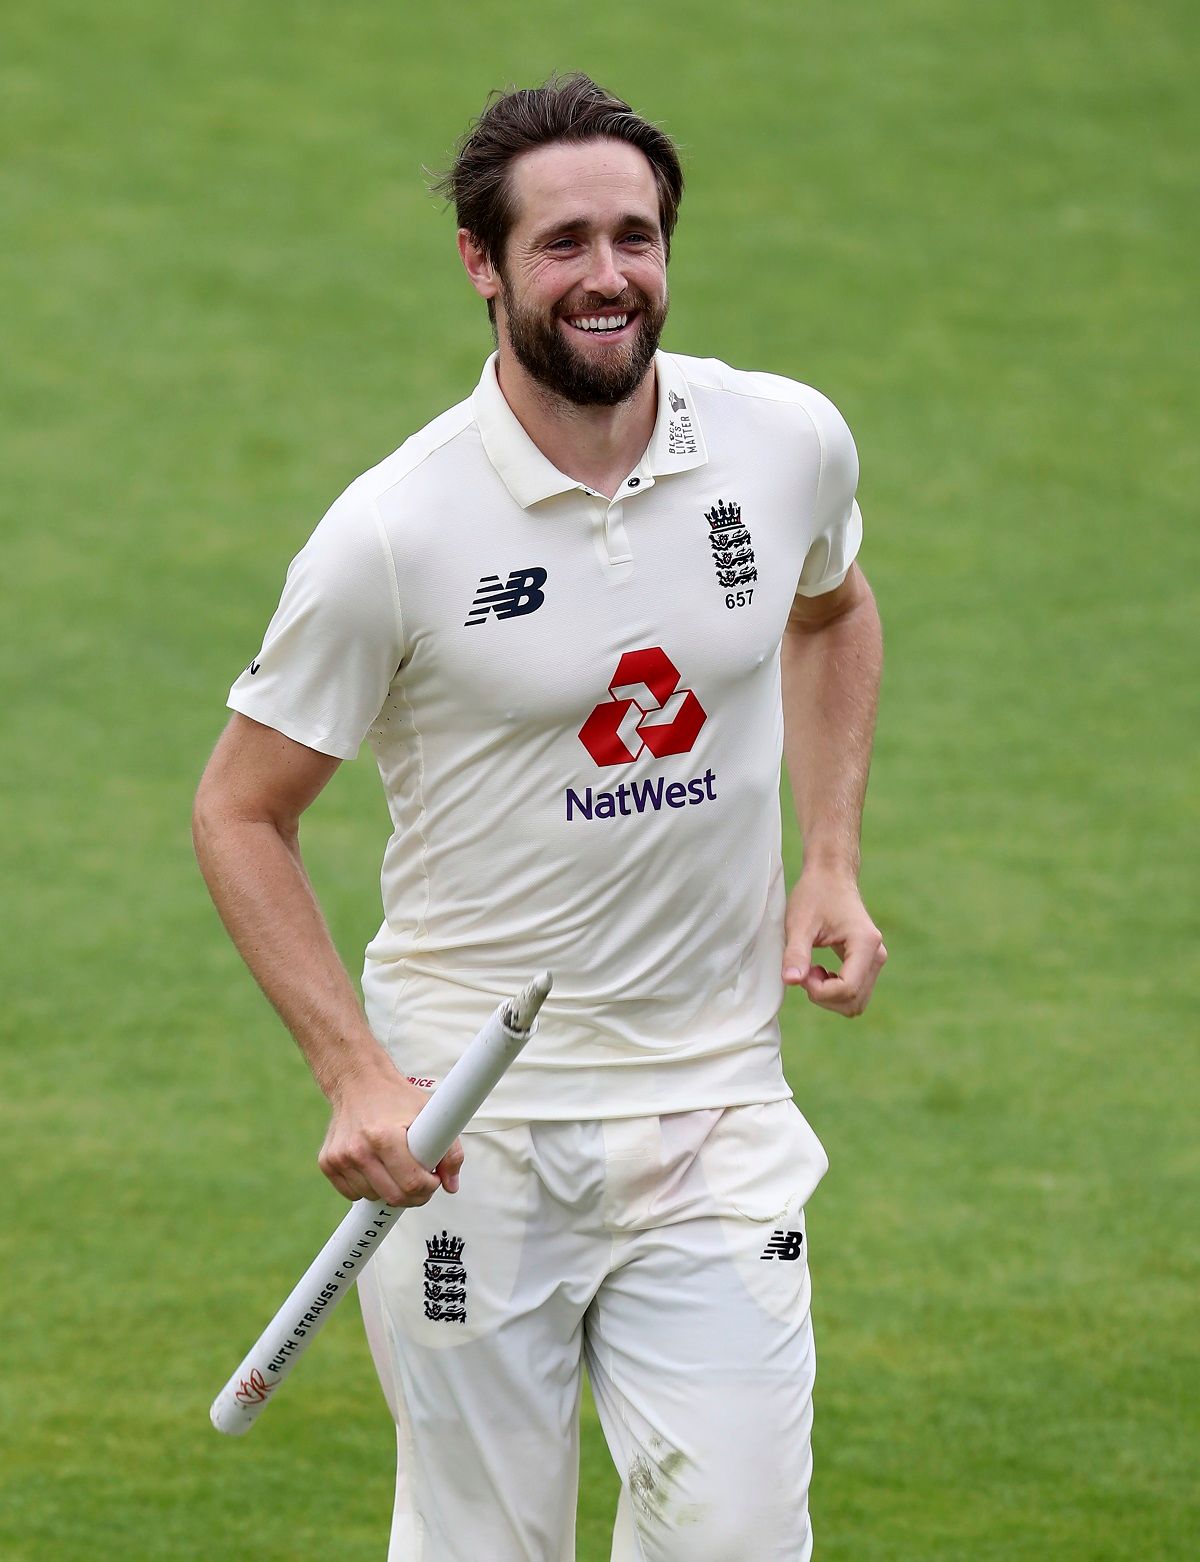 Chris Woakes 5 wickets against West Indies in Manchester test